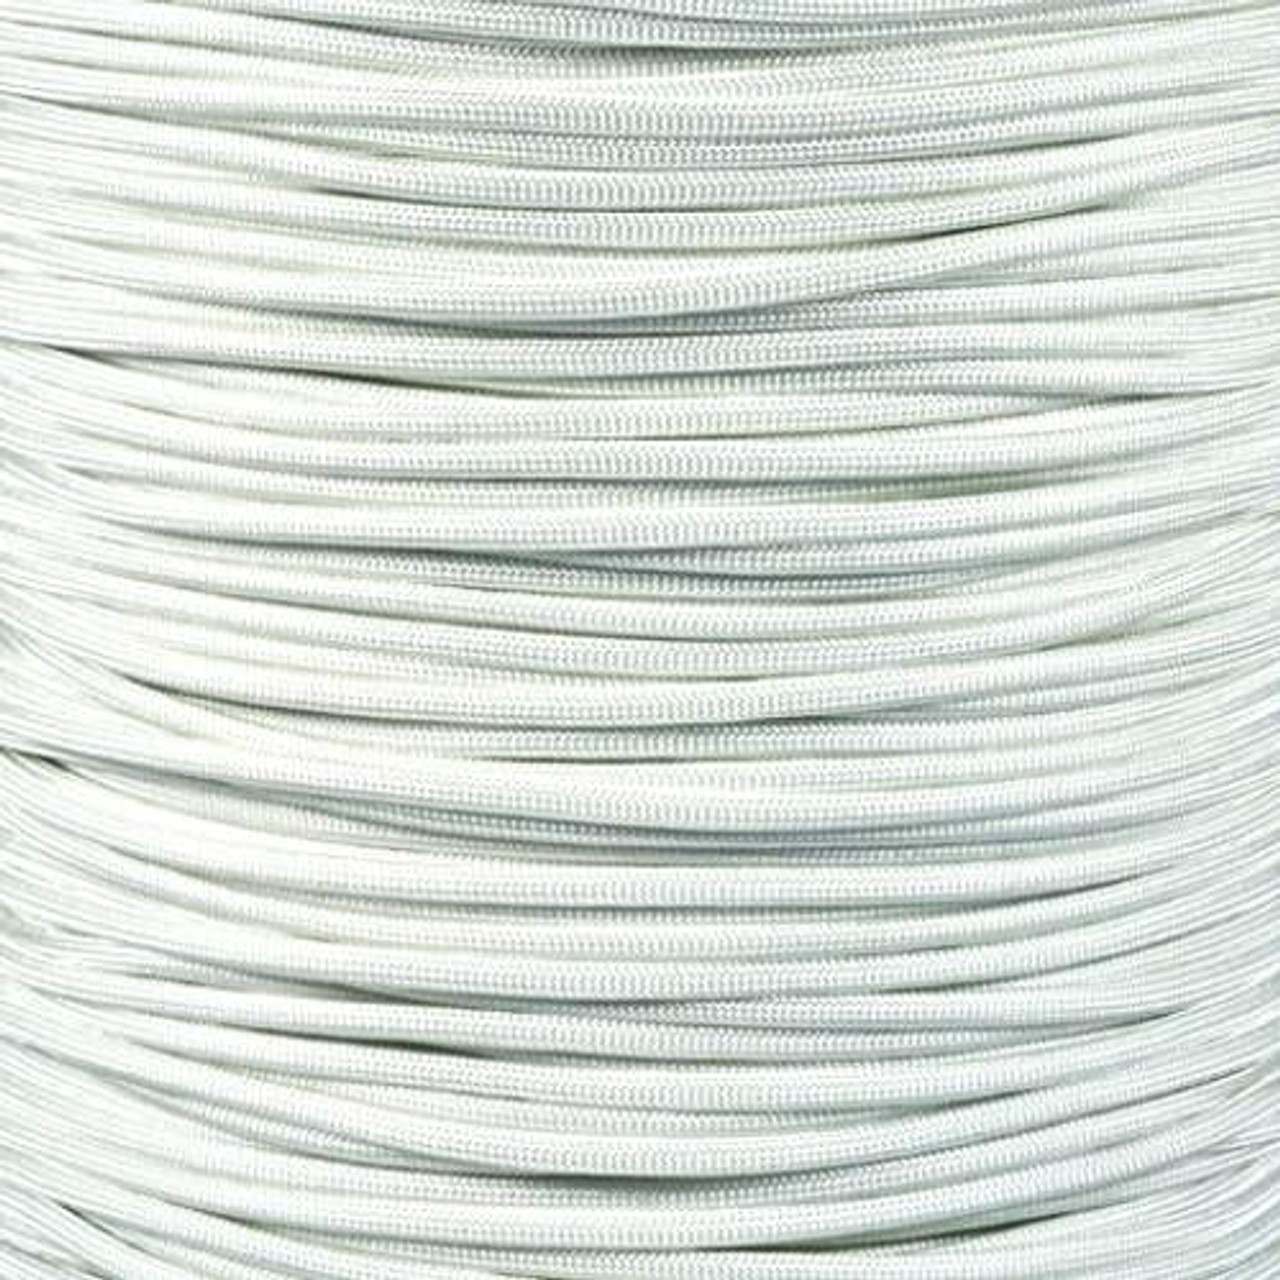 Peregrine Outfitters 447452 1000 ft. Paracord, White 